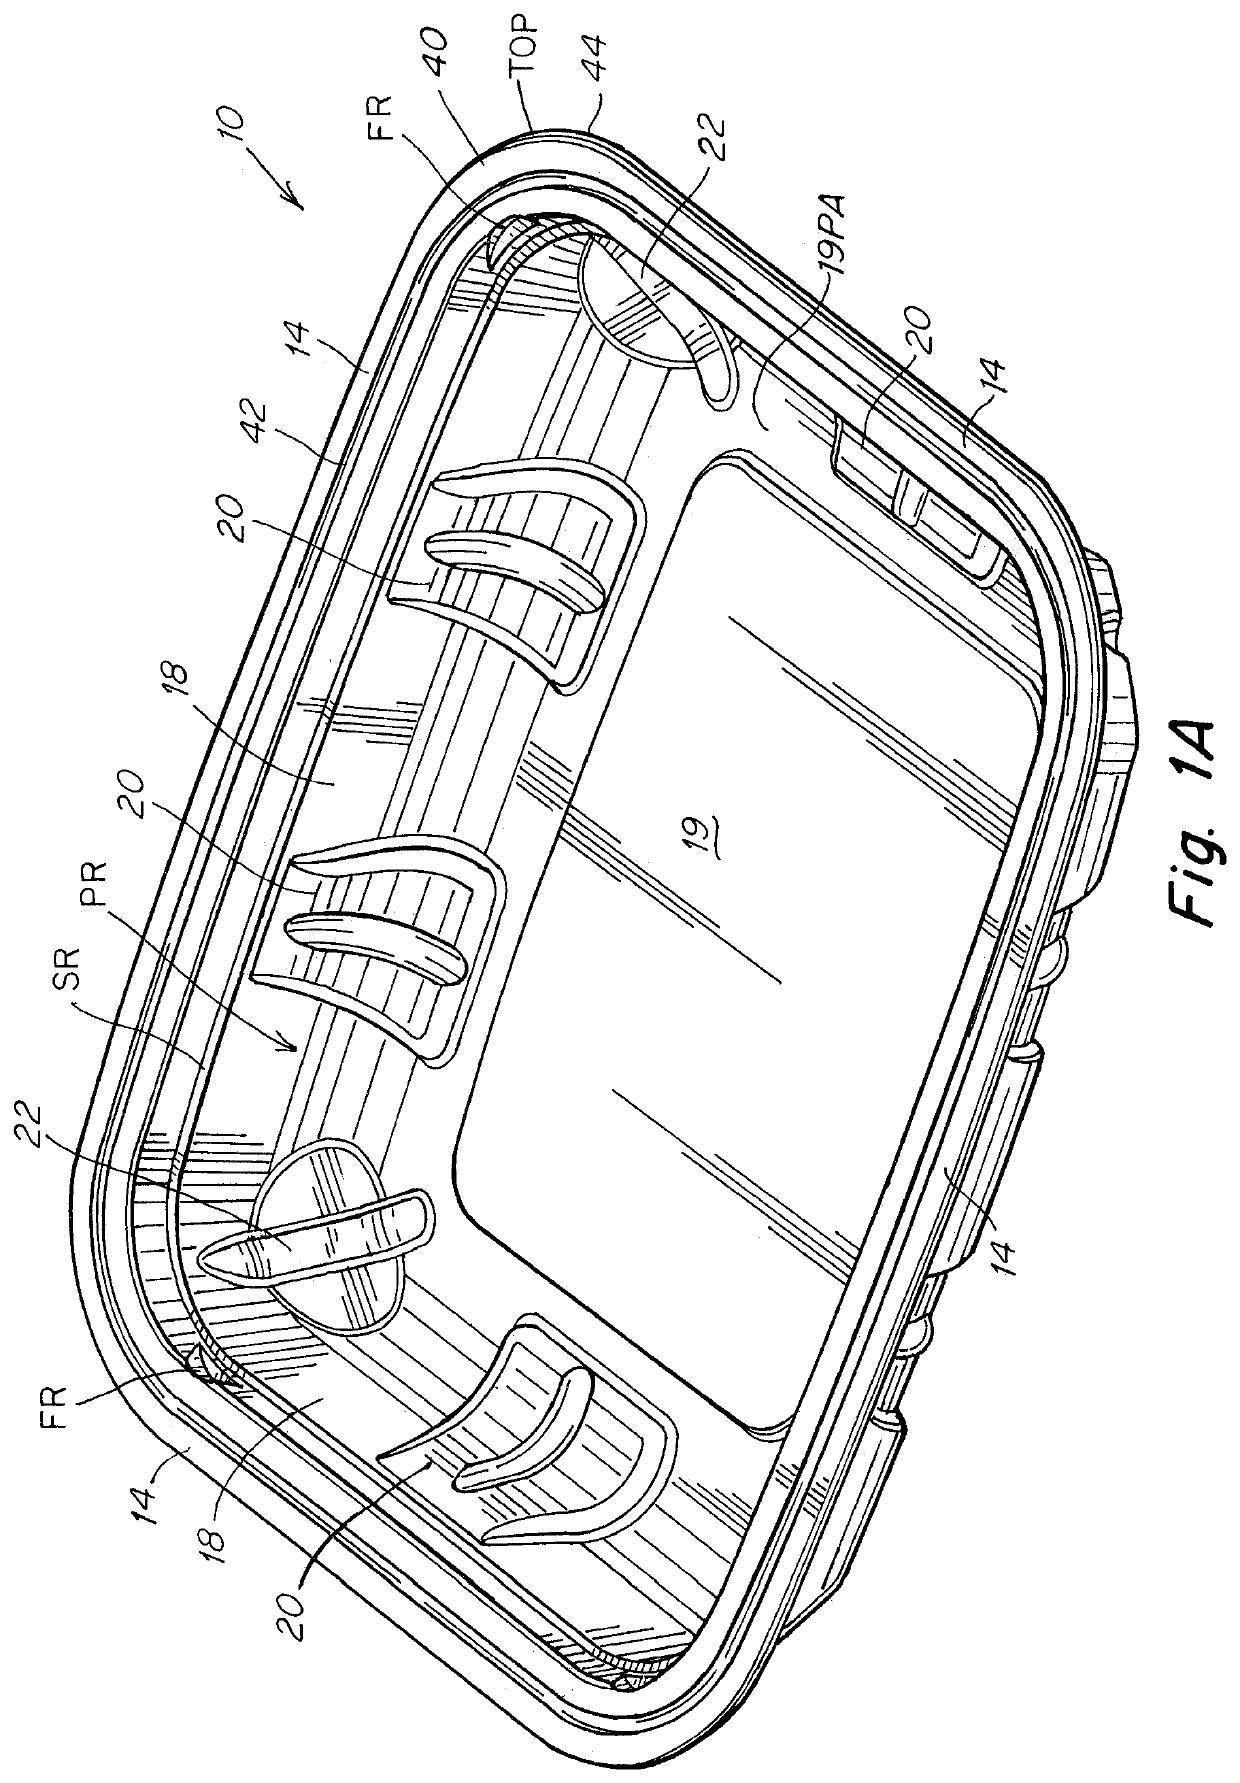 Packaging tray and method of manufacture